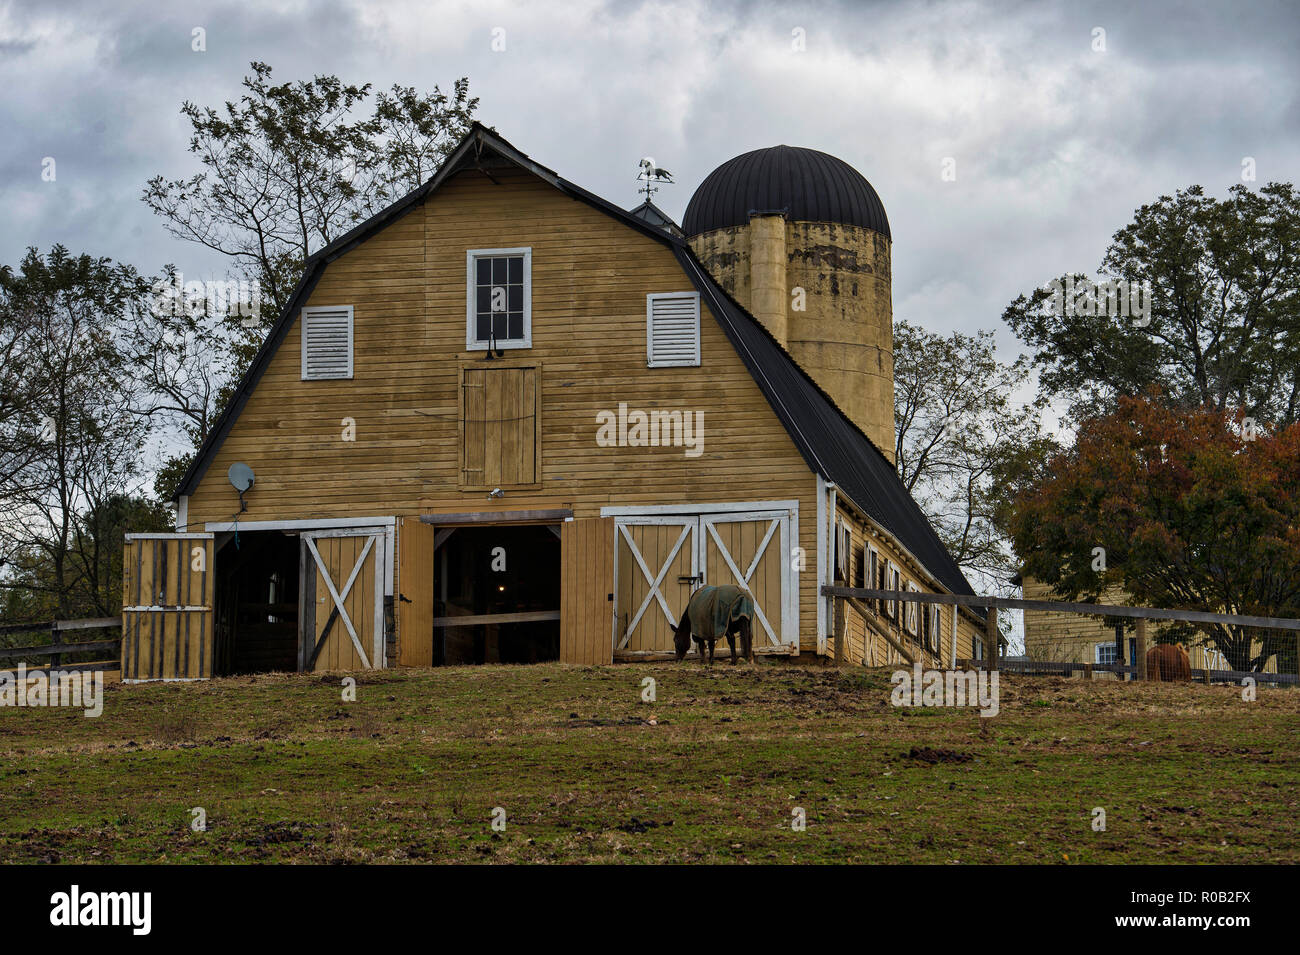 https://c8.alamy.com/comp/R0B2FX/united-states-october-29-2018-fieldstone-farm-on-old-waterford-road-between-waterford-and-leesburg-loudoun-county-retains-much-of-its-charm-and-s-R0B2FX.jpg